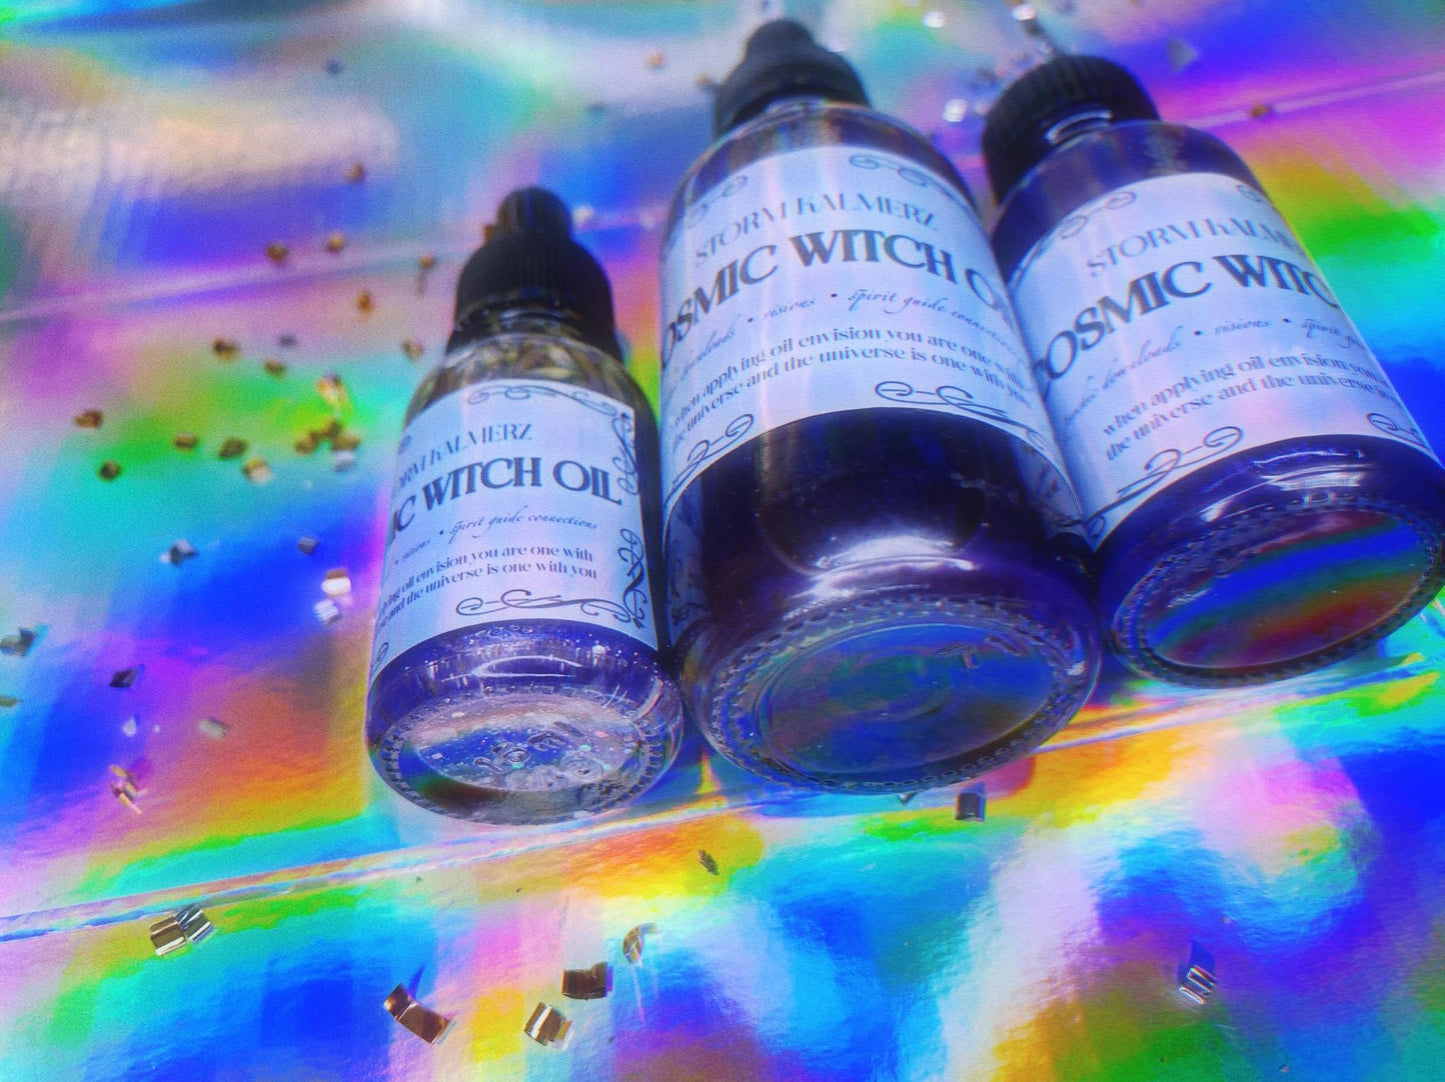 Cosmic Witch Oil